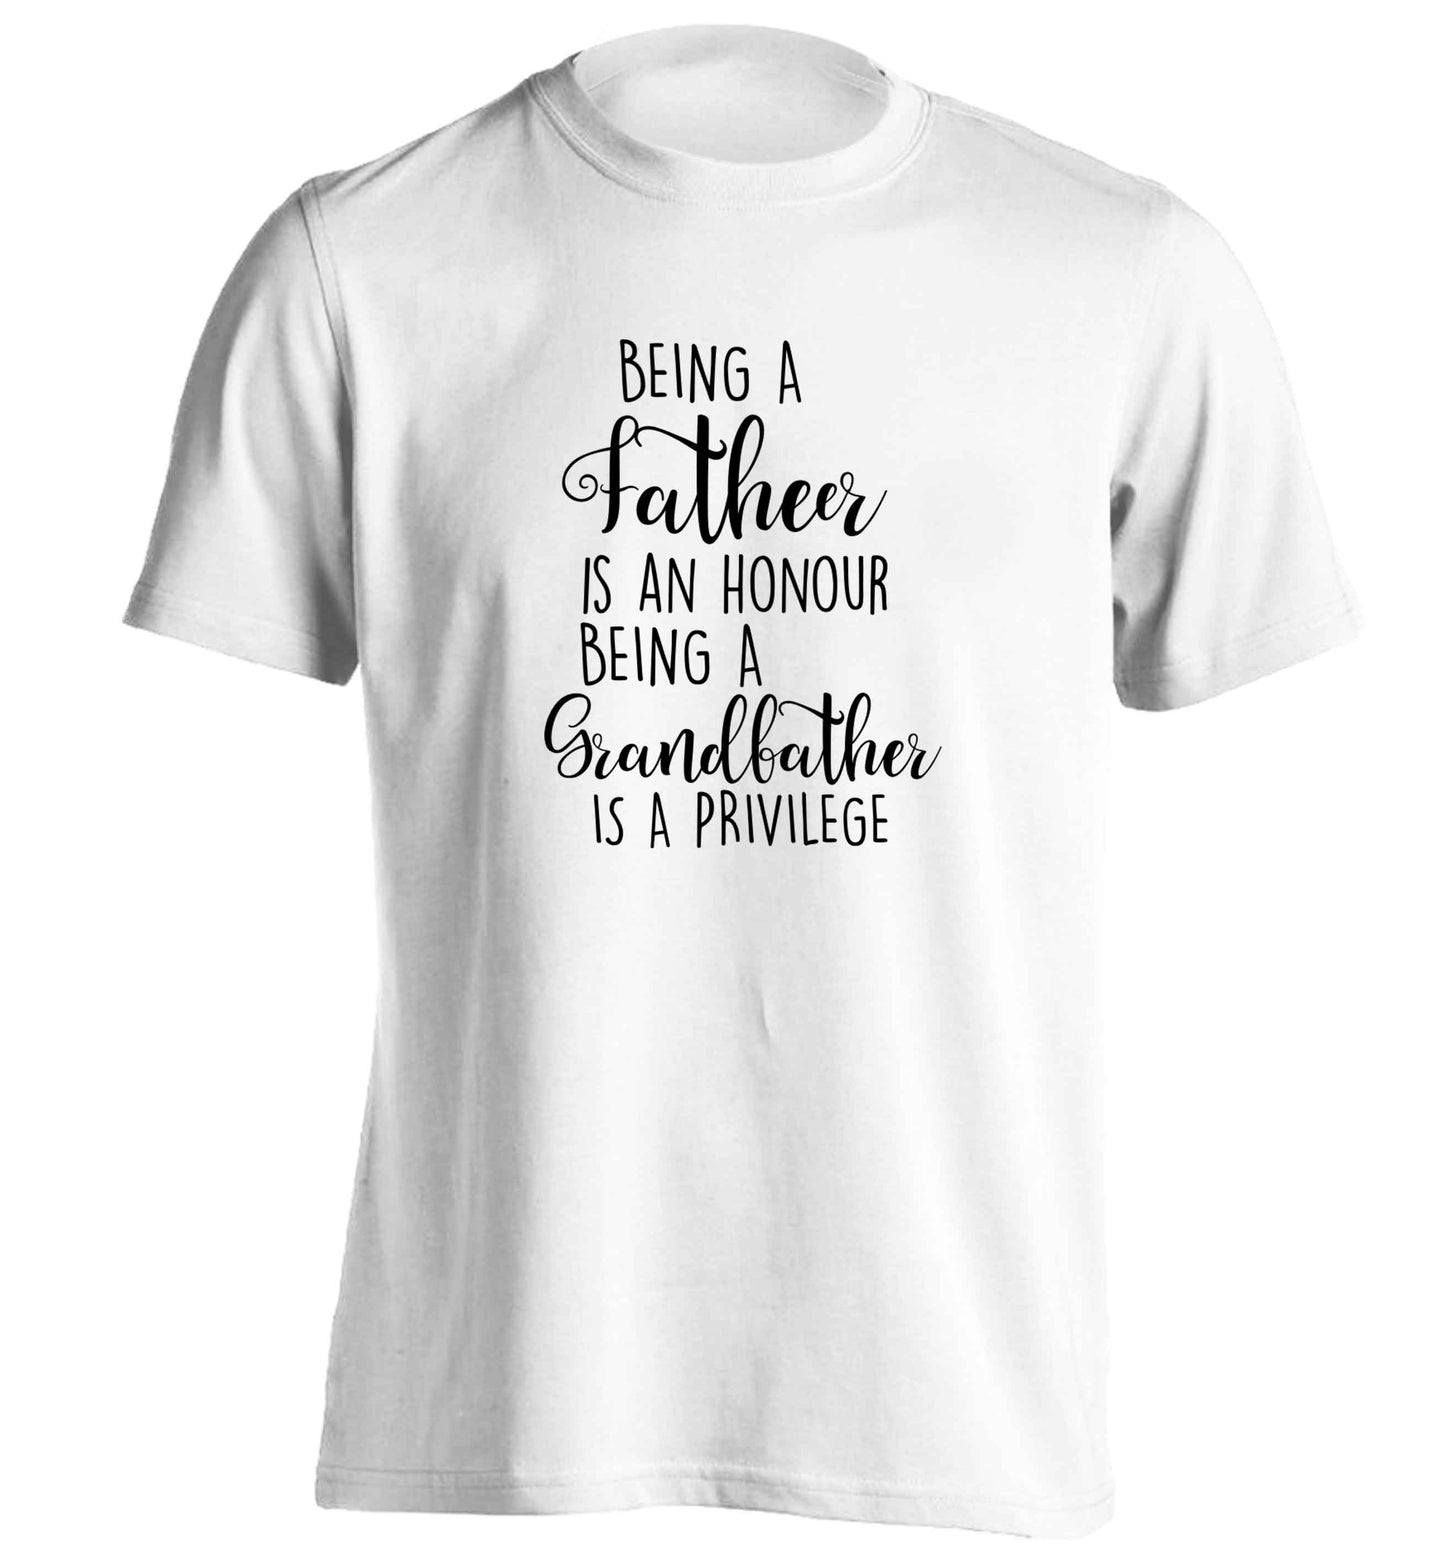 Being a father is an honour being a grandfather is a privilege adults unisex white Tshirt 2XL